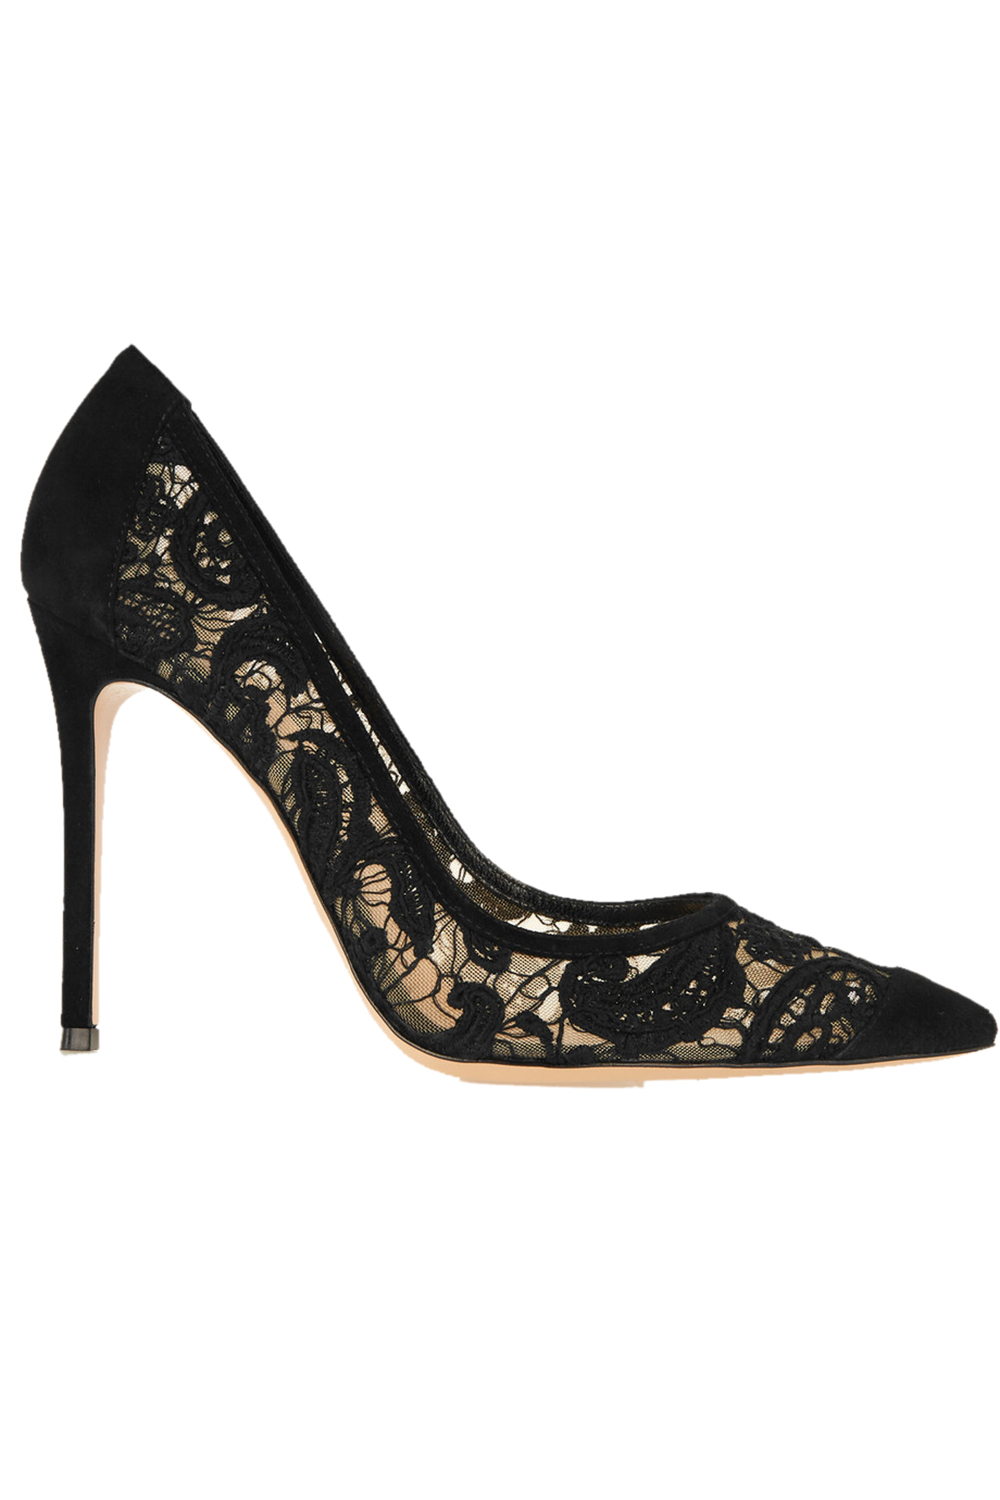 Gianvito Rossi Heels, approx $1,015, from Net-a-Porter.